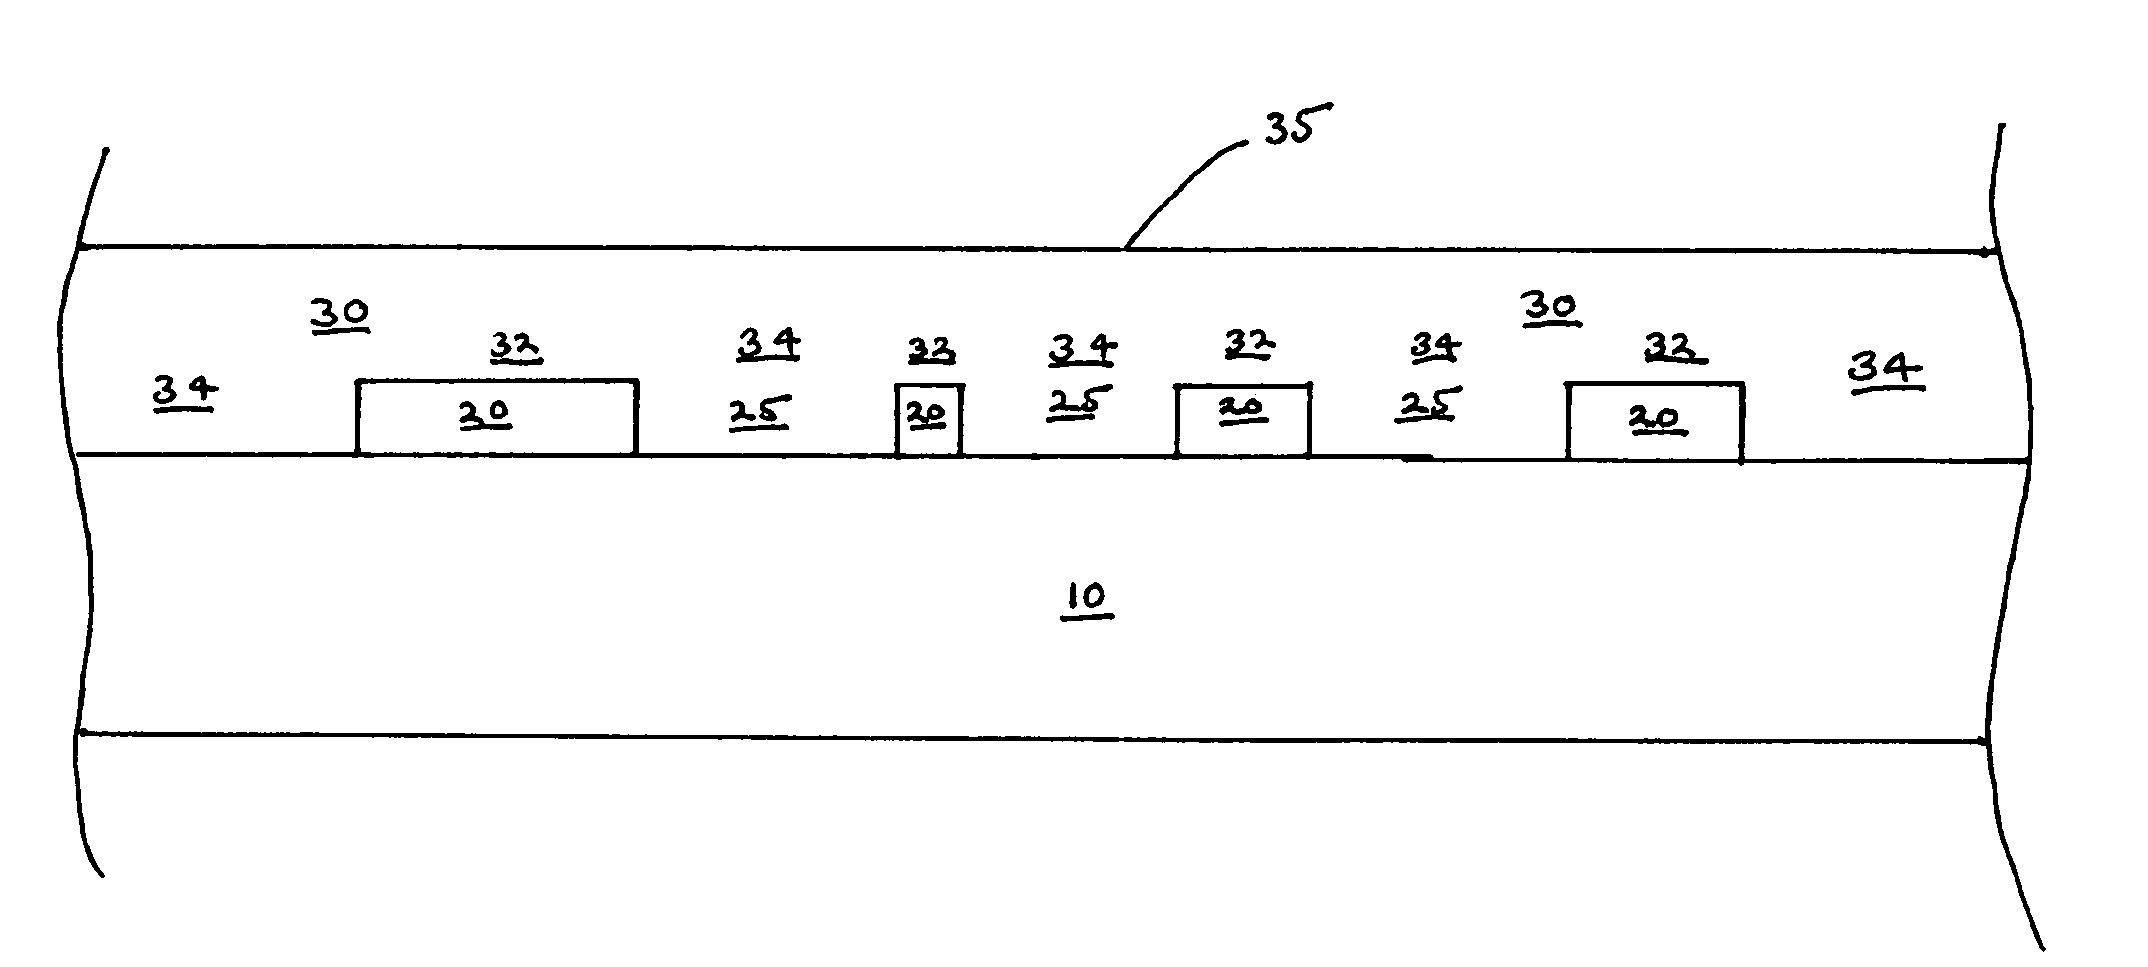 Method to planarize and reduce defect density of silicon germanium